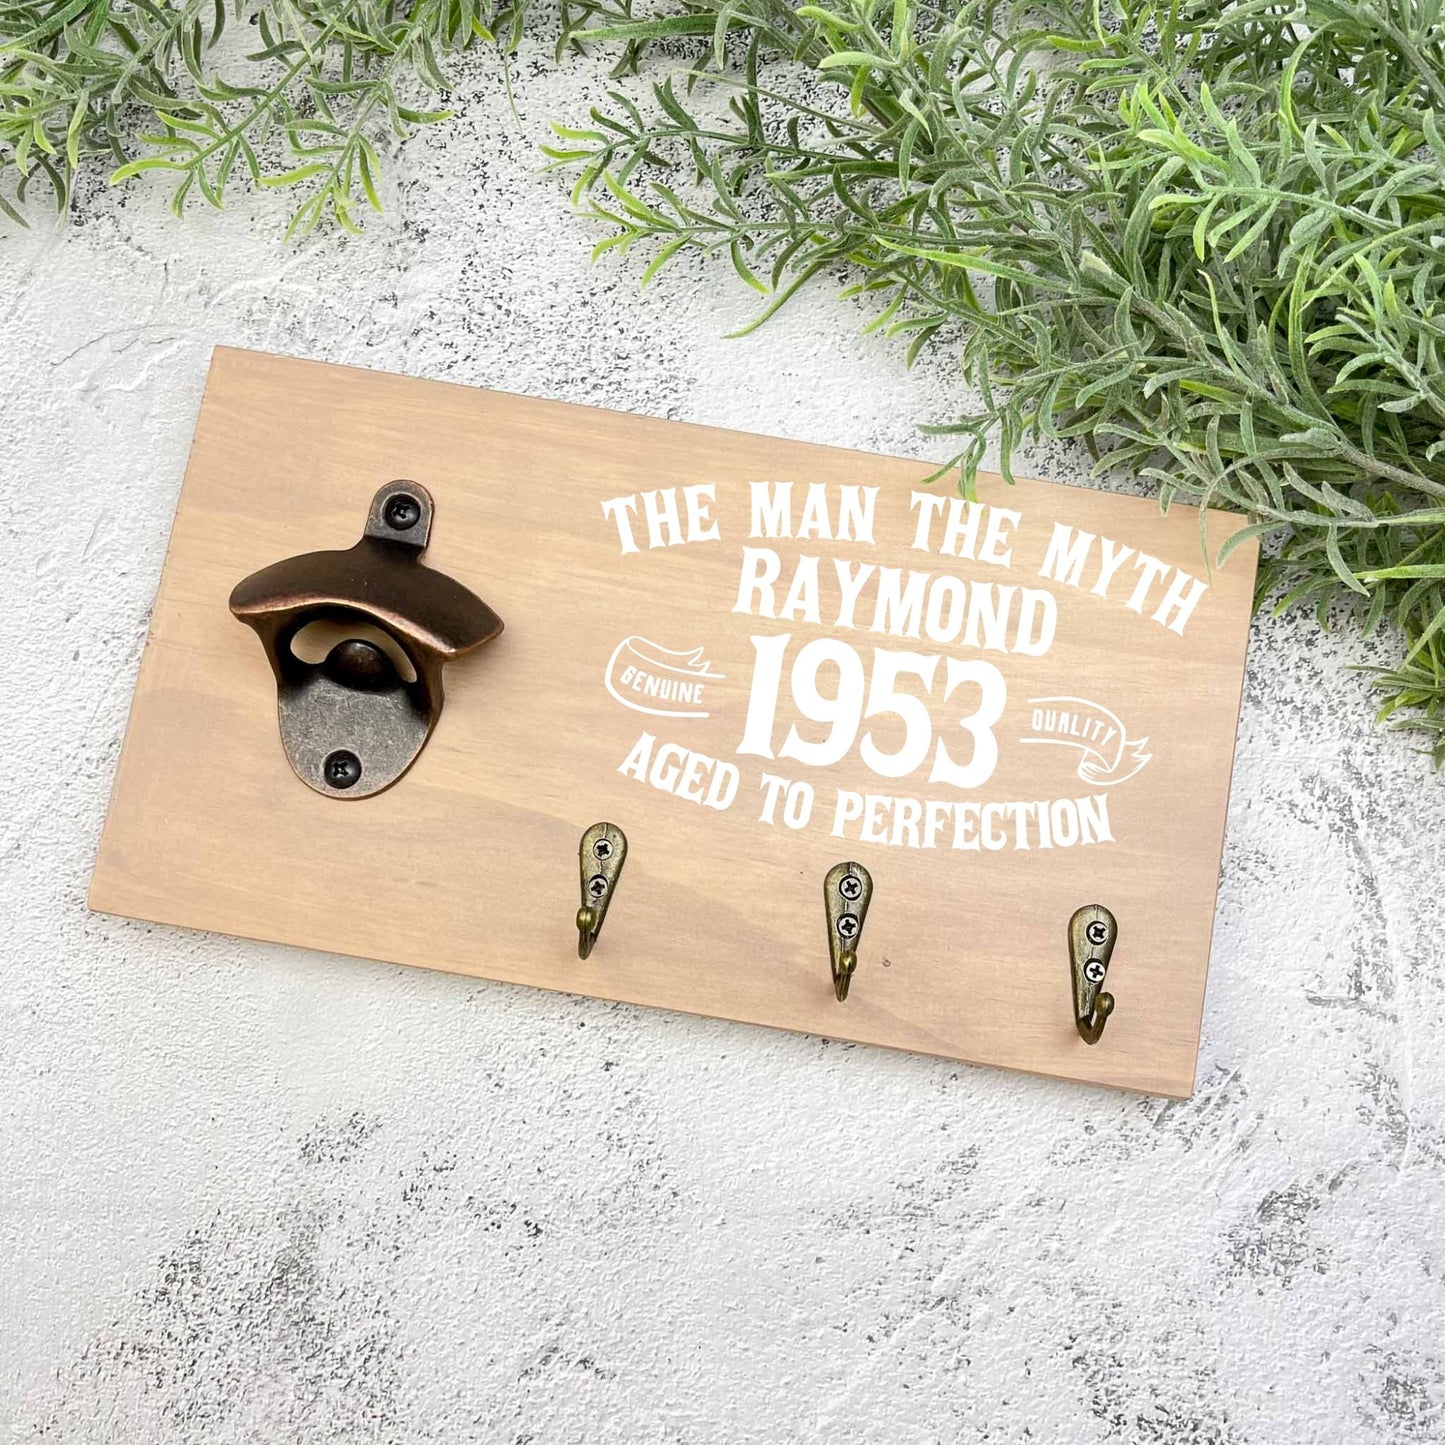 Personalised 70th Birthday beer sign, 1953 beer sign gift, 1954 birthday, 70th celebration, bottle opener sign